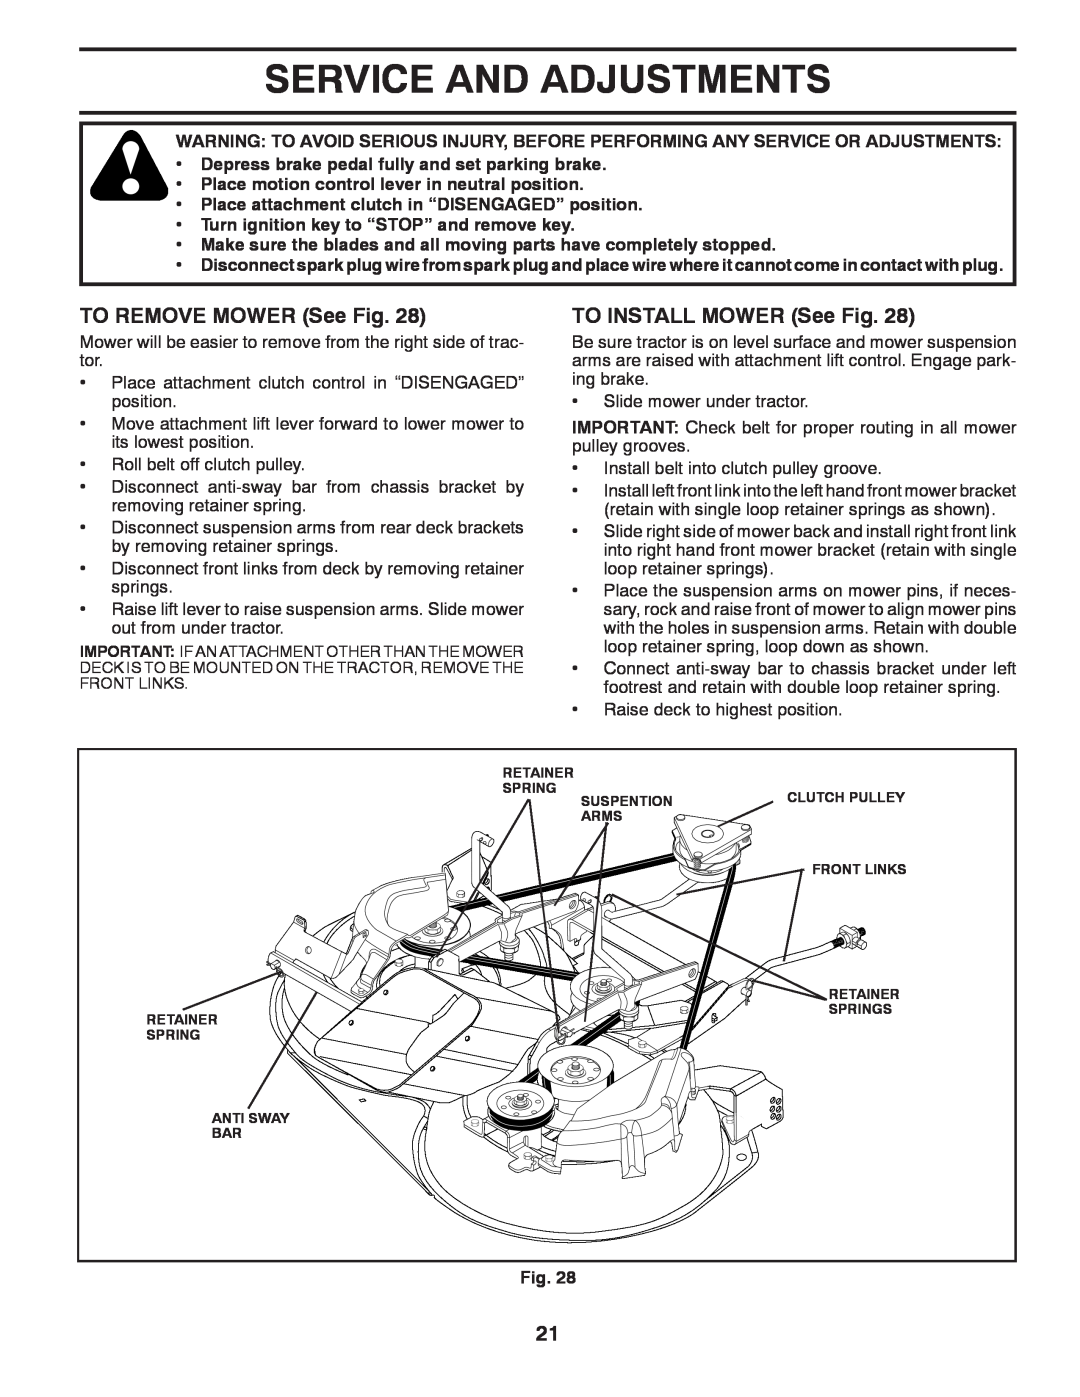 Husqvarna CTH2036T manual Service And Adjustments, TO REMOVE MOWER See Fig, TO INSTALL MOWER See Fig 